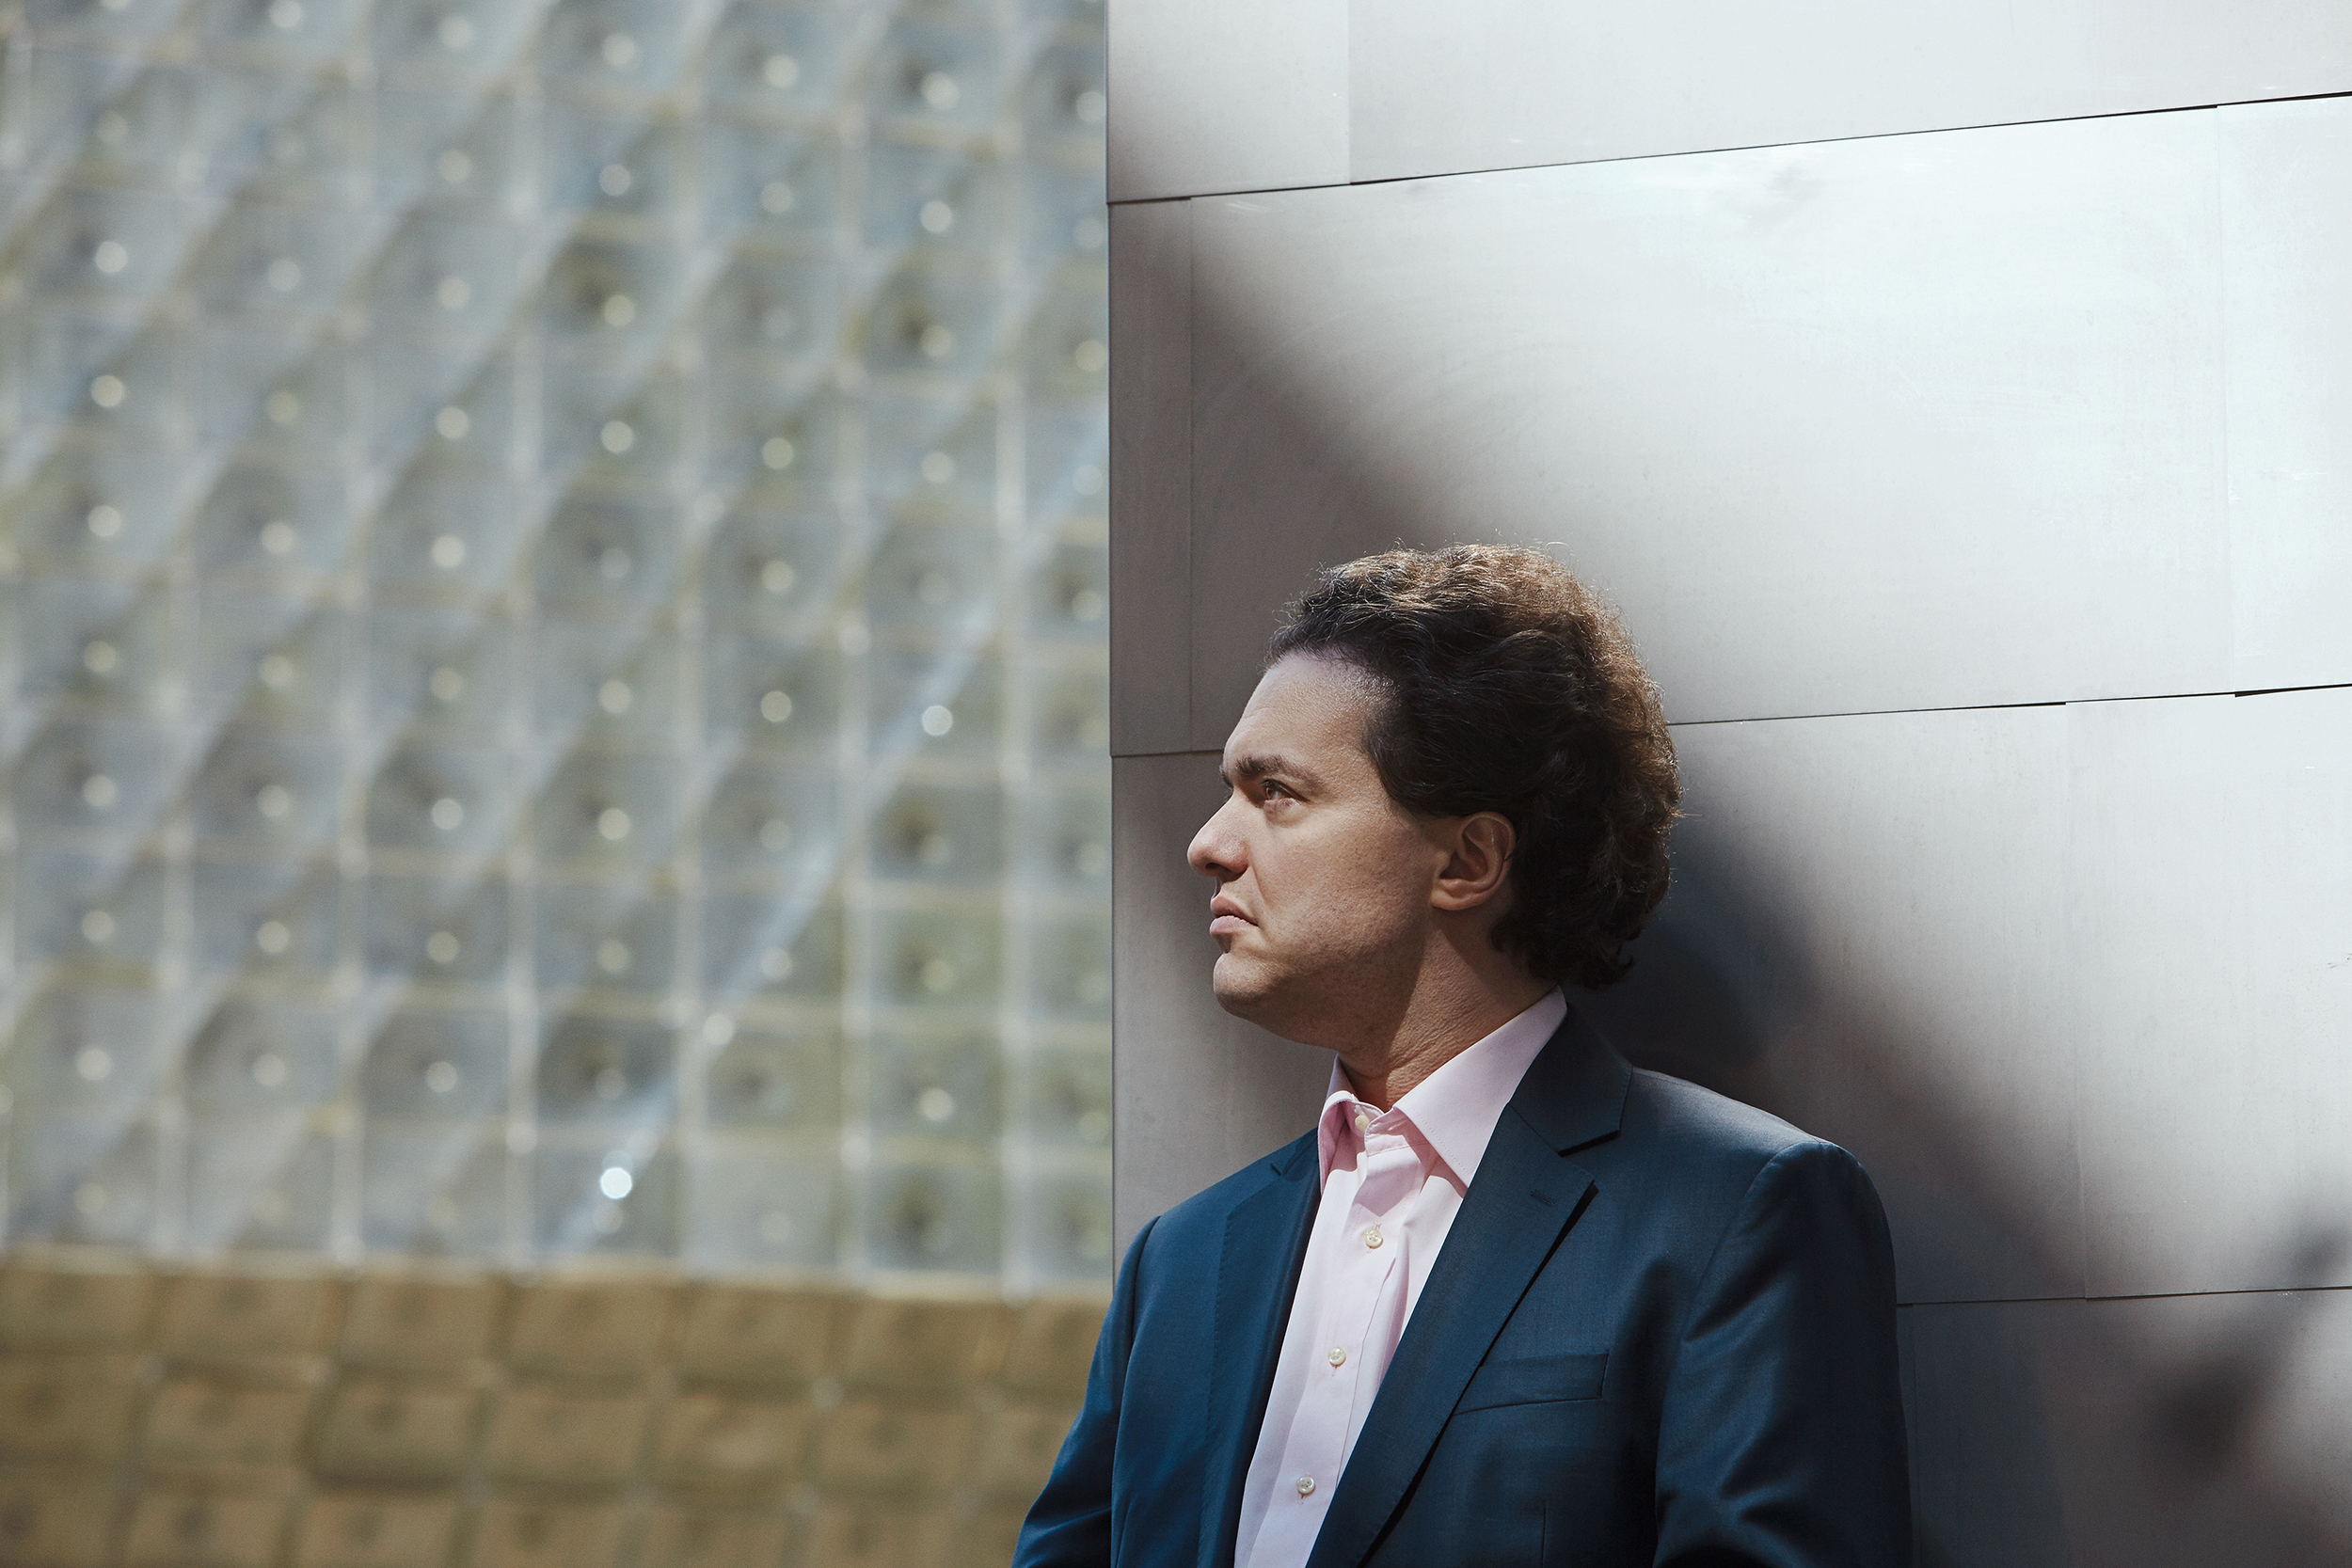 Profile shot of pianist Evgeny Kissin. He leans against a gray wall and looks to the left.